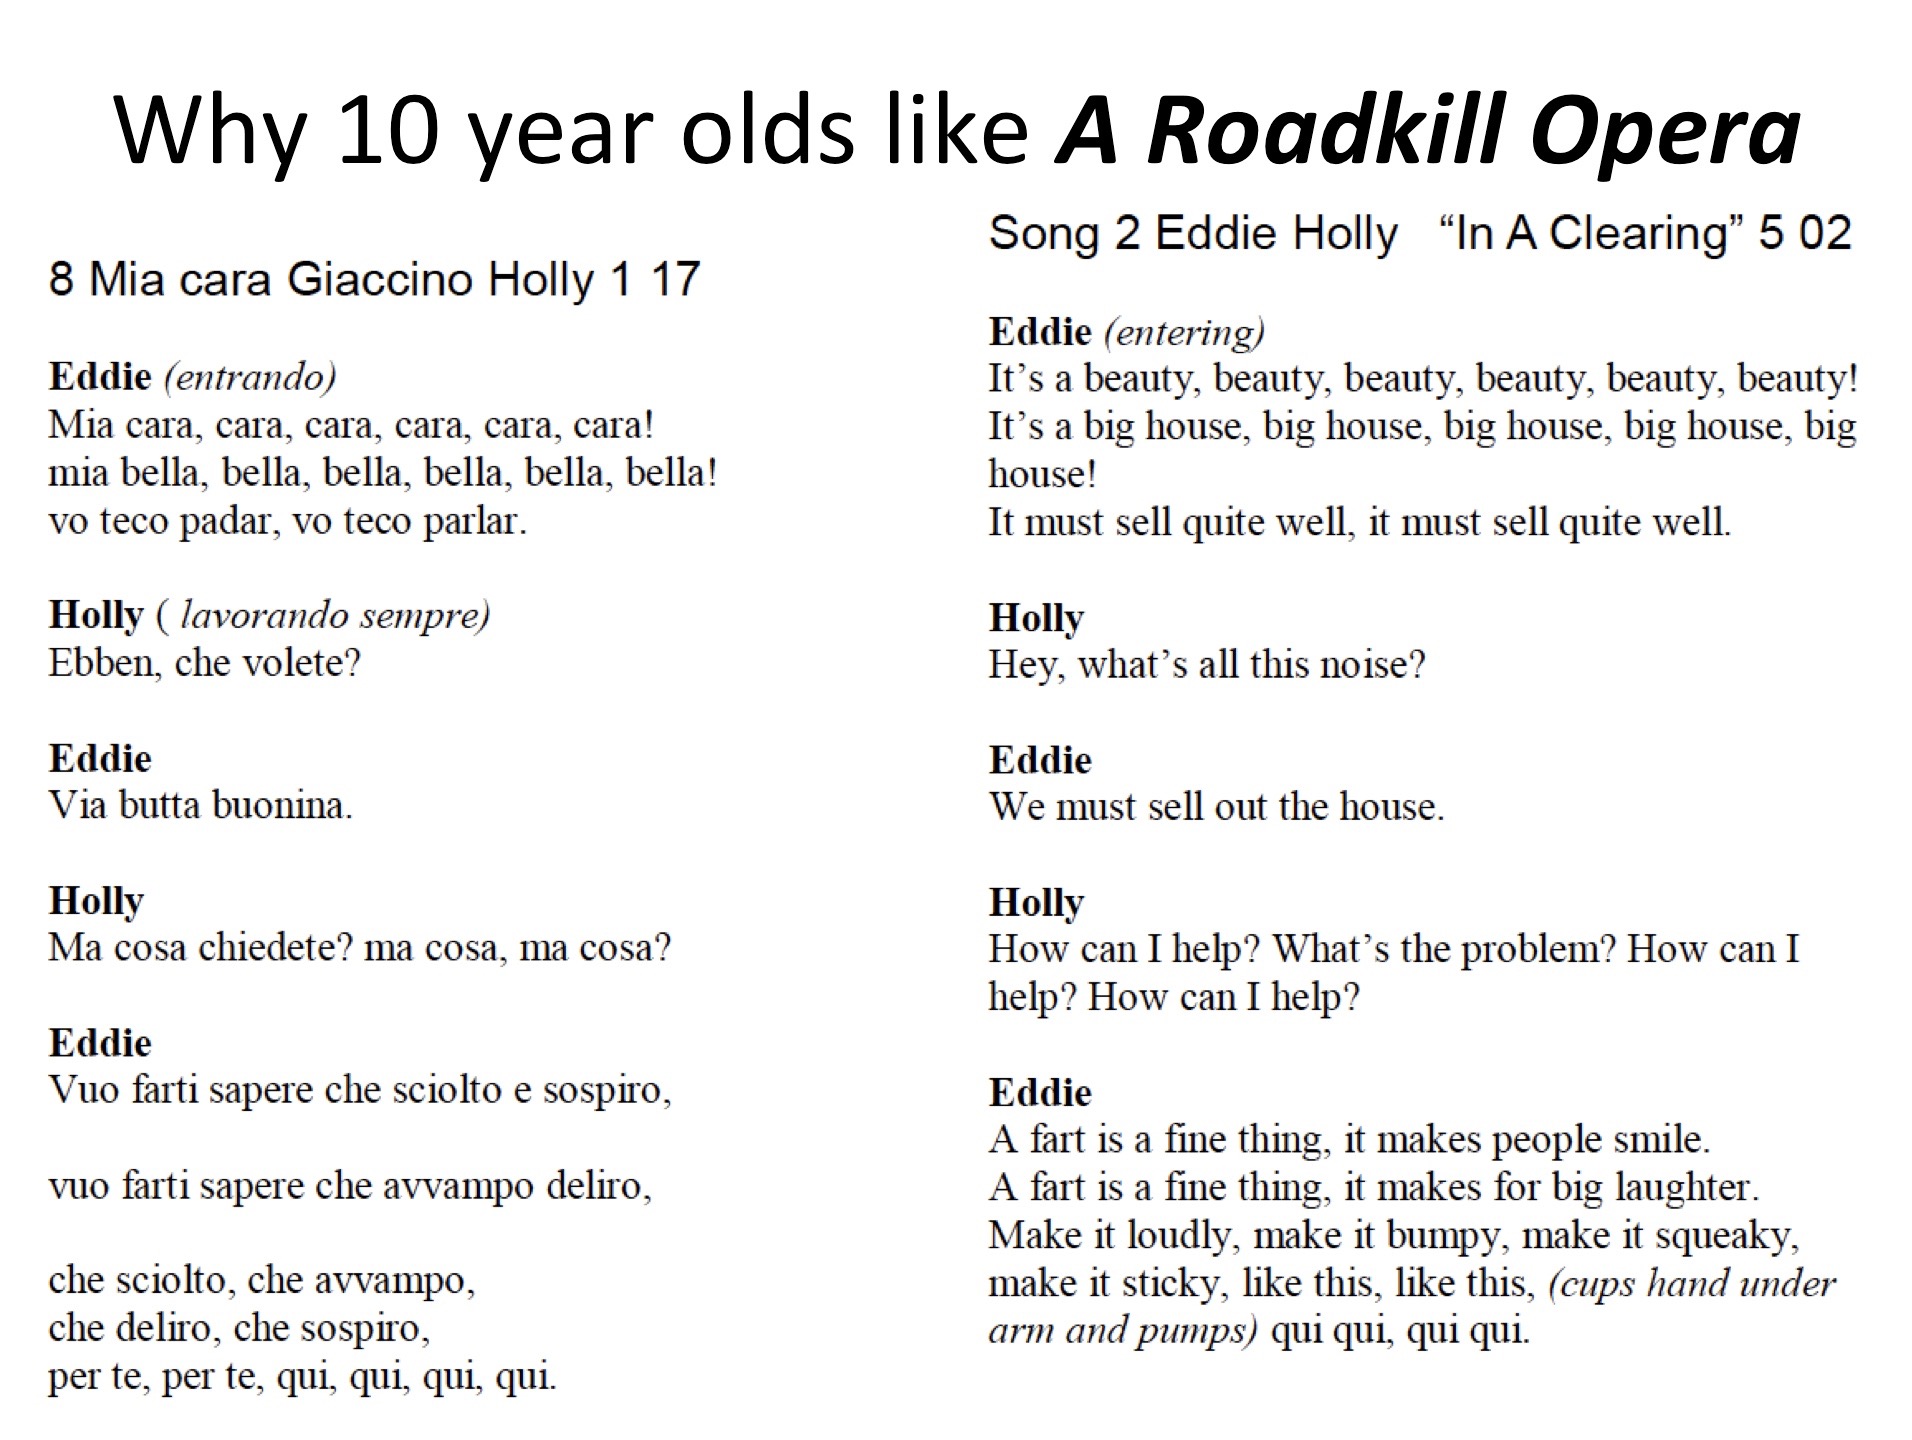 Photo with title Why 10 year olds like A Roadkill Opera, with the lyrics below including those that read A fart is a fine thing, it makes people smile.